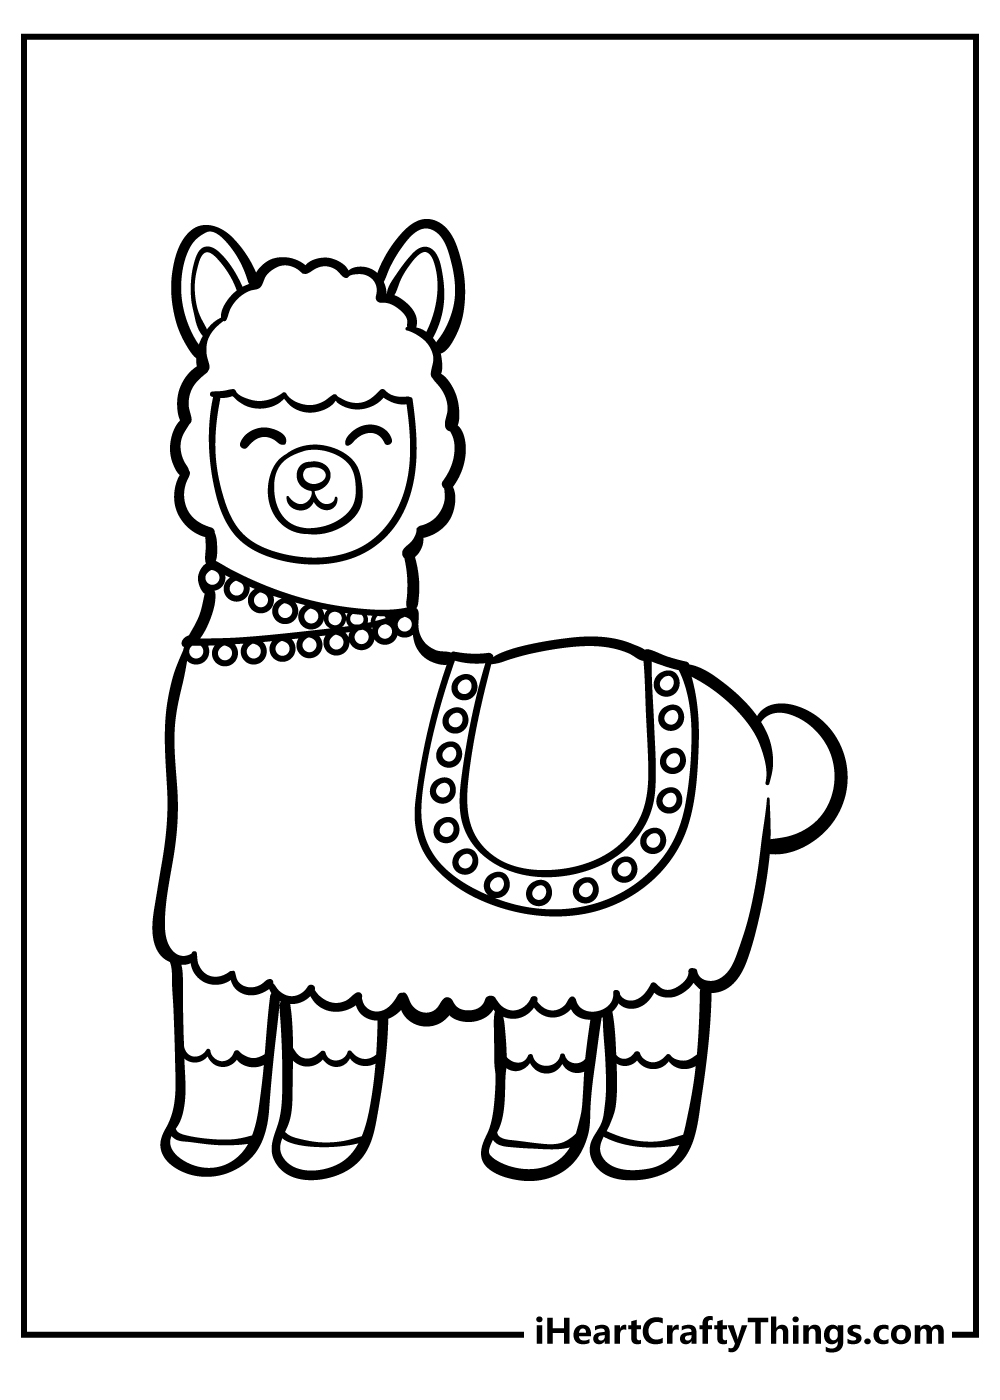 llama Coloring Pages for kids free download